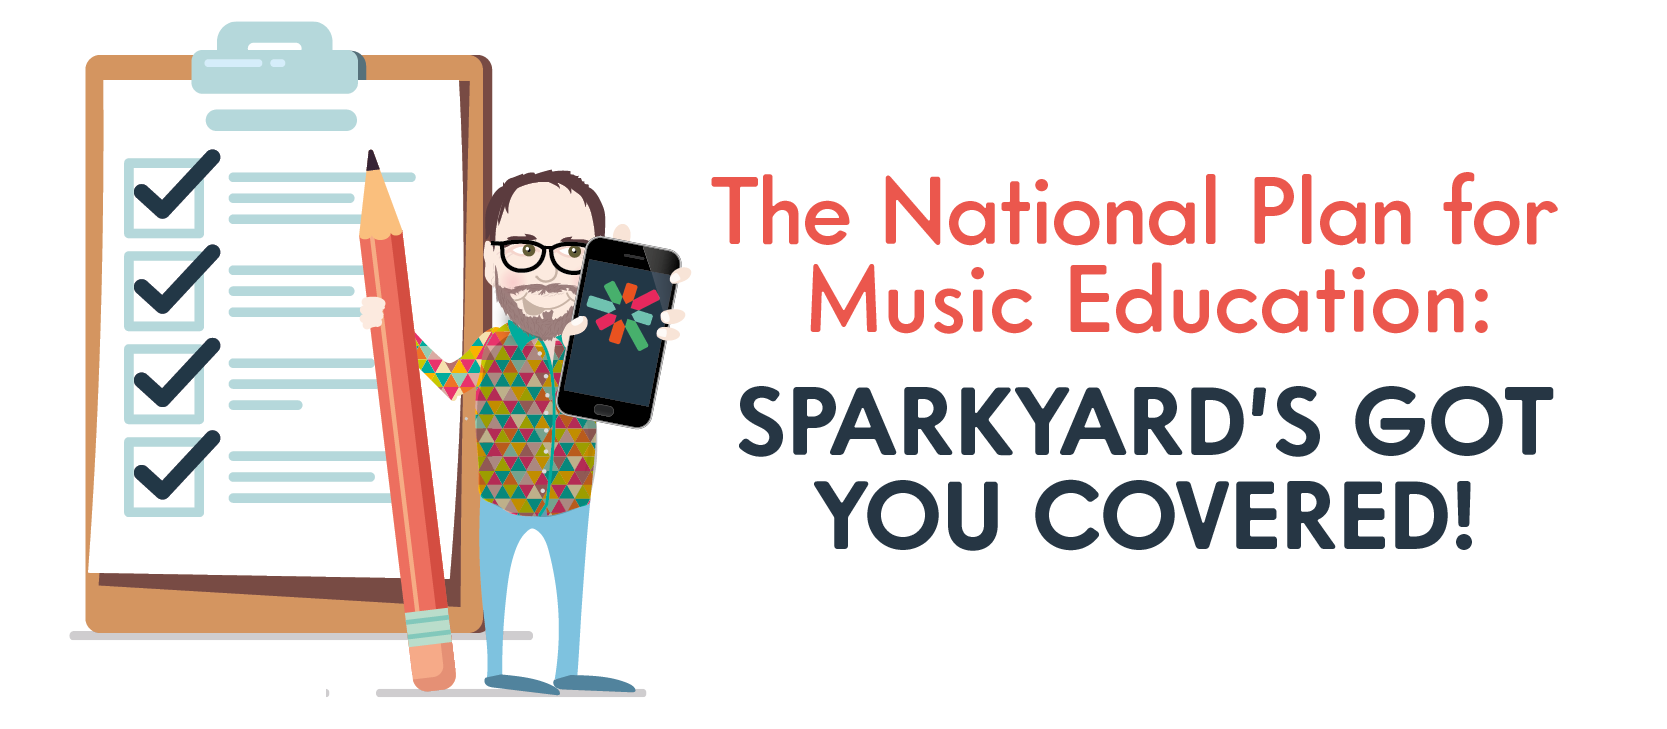 The National Plan for Music Education: Sparkyard’s got you covered!